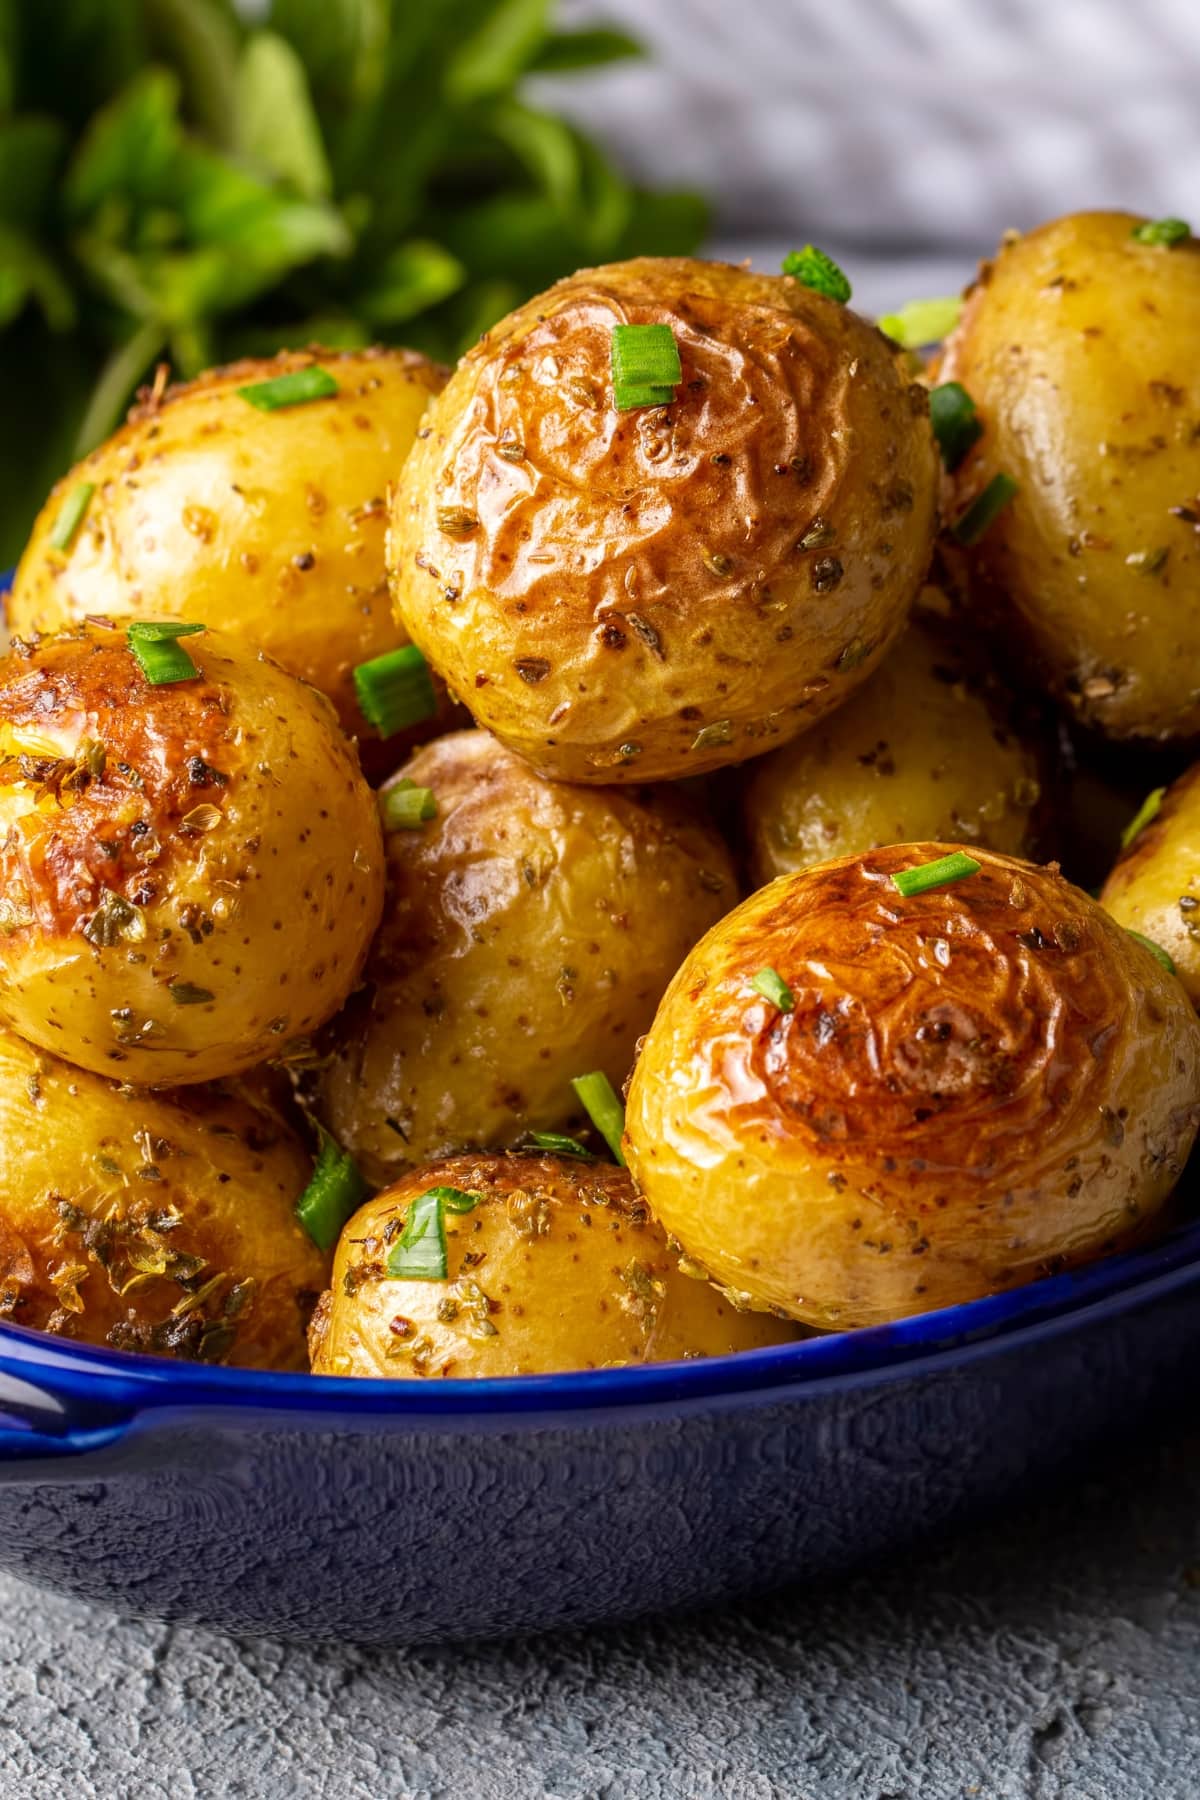 Bowl of Homemade Roasted Baby Potatoes with Parsley